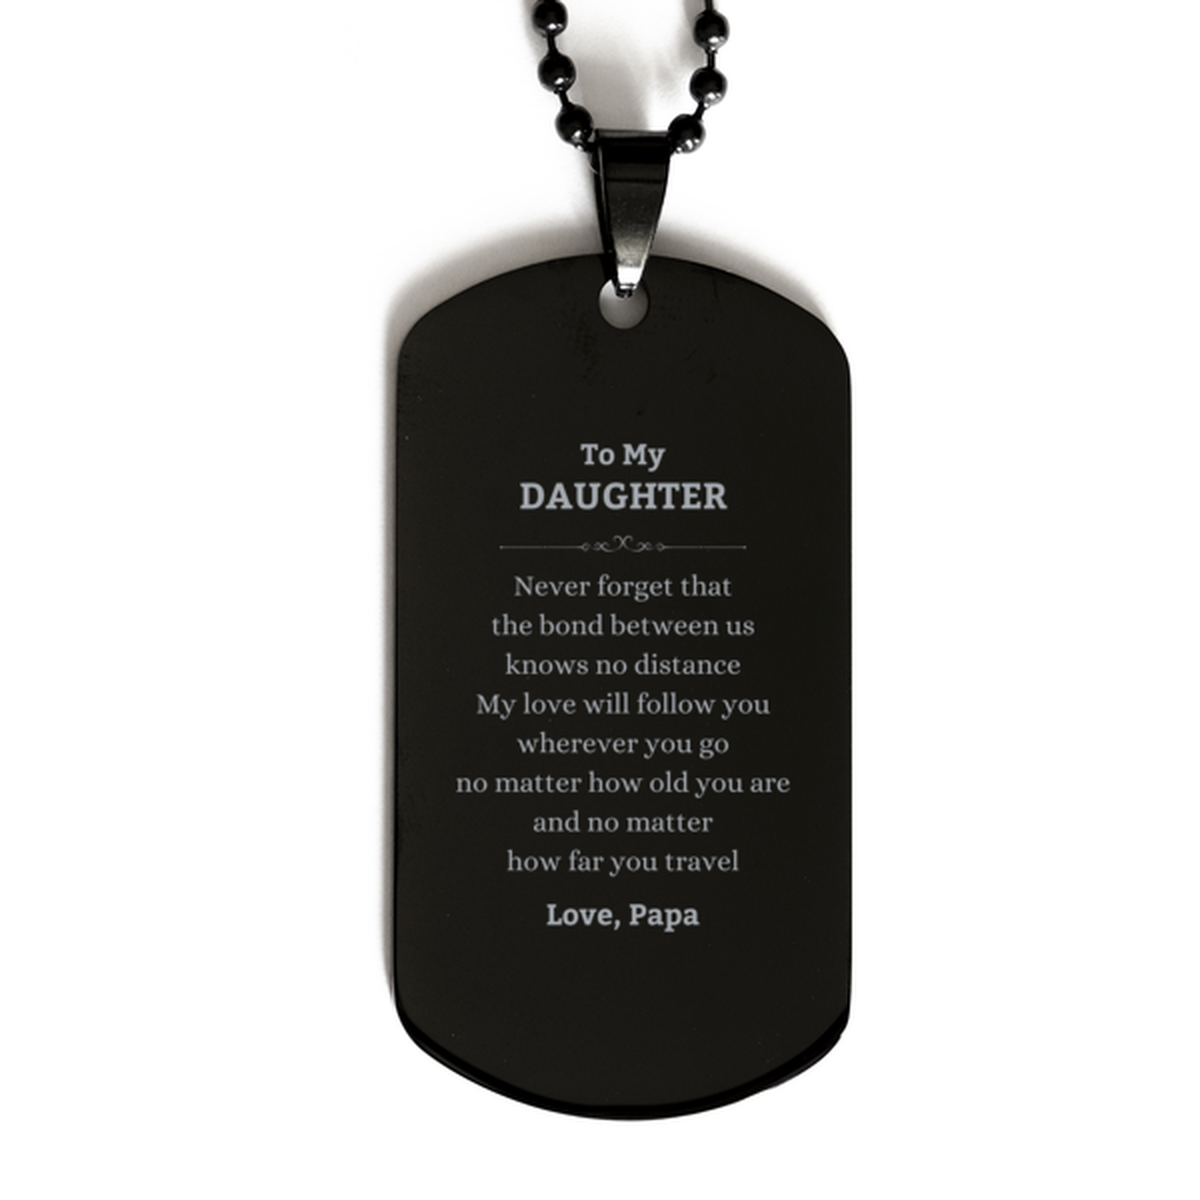 Daughter Birthday Gifts from Papa, Adjustable Black Dog Tag for Daughter Christmas Graduation Unique Gifts Daughter Never forget that the bond between us knows no distance. Love, Papa